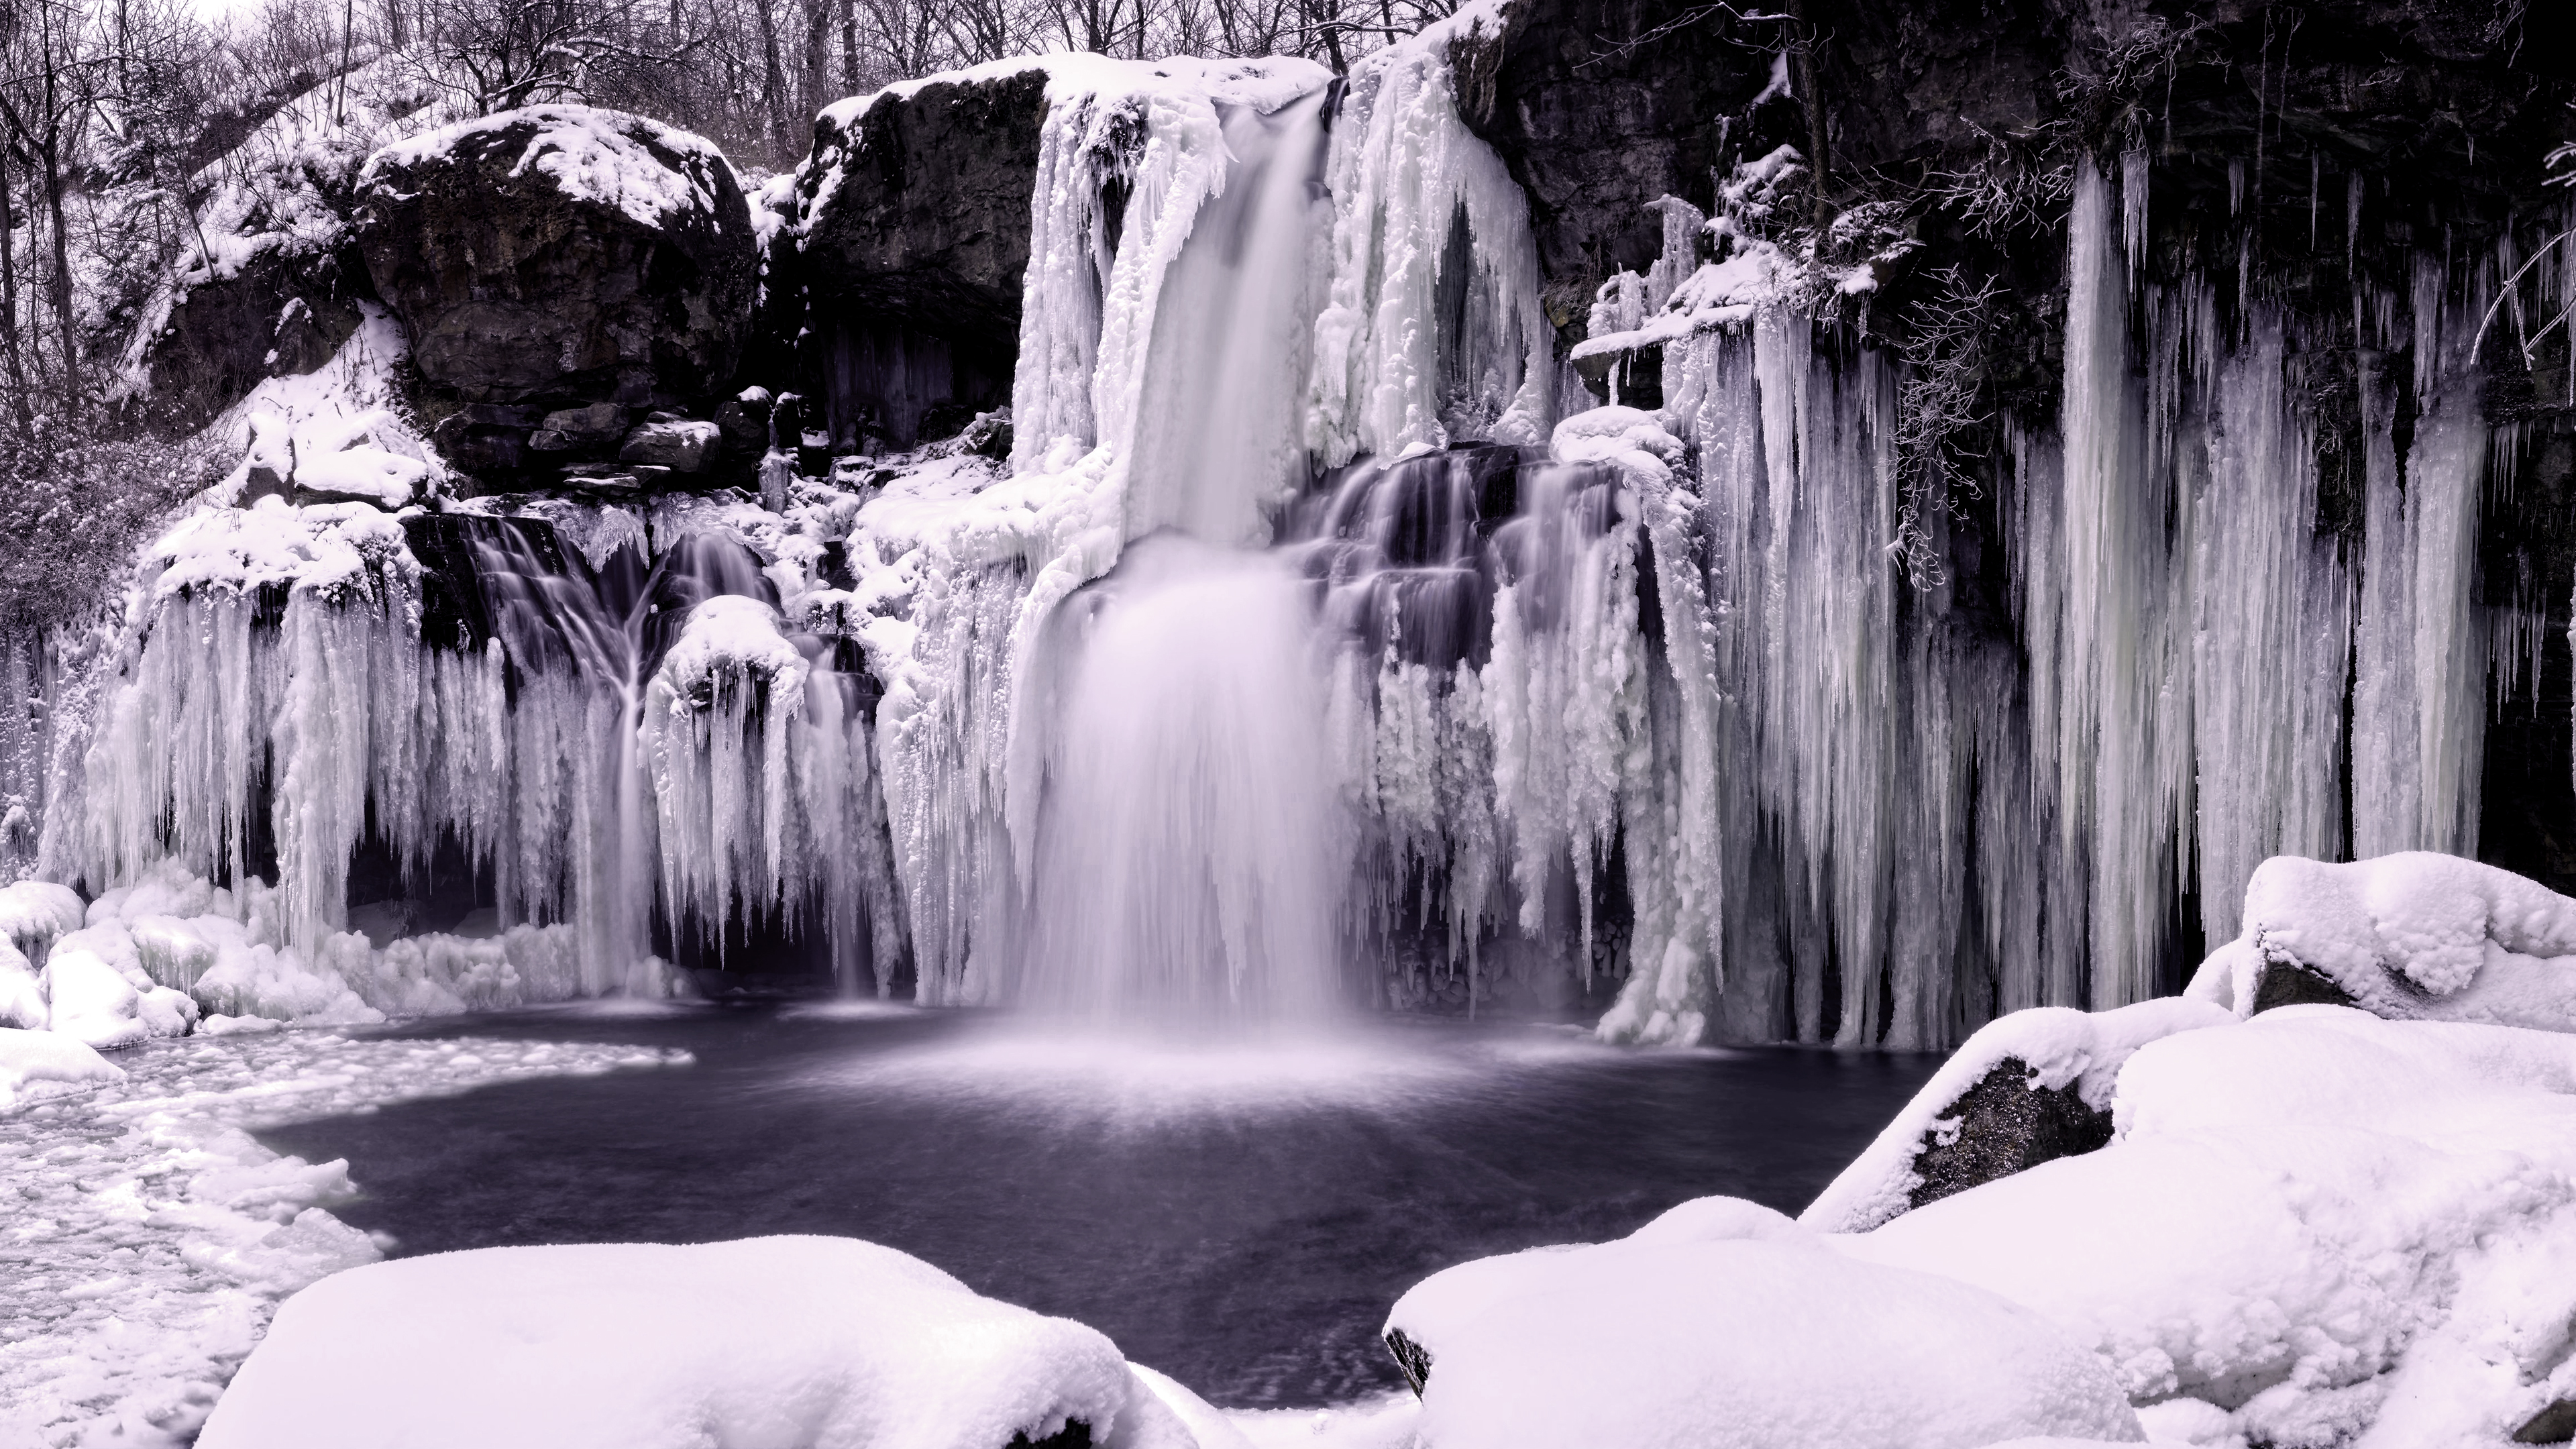 General 3840x2160 icicle frozen river waterfall snow Edward Bartel edit long exposure winter nature